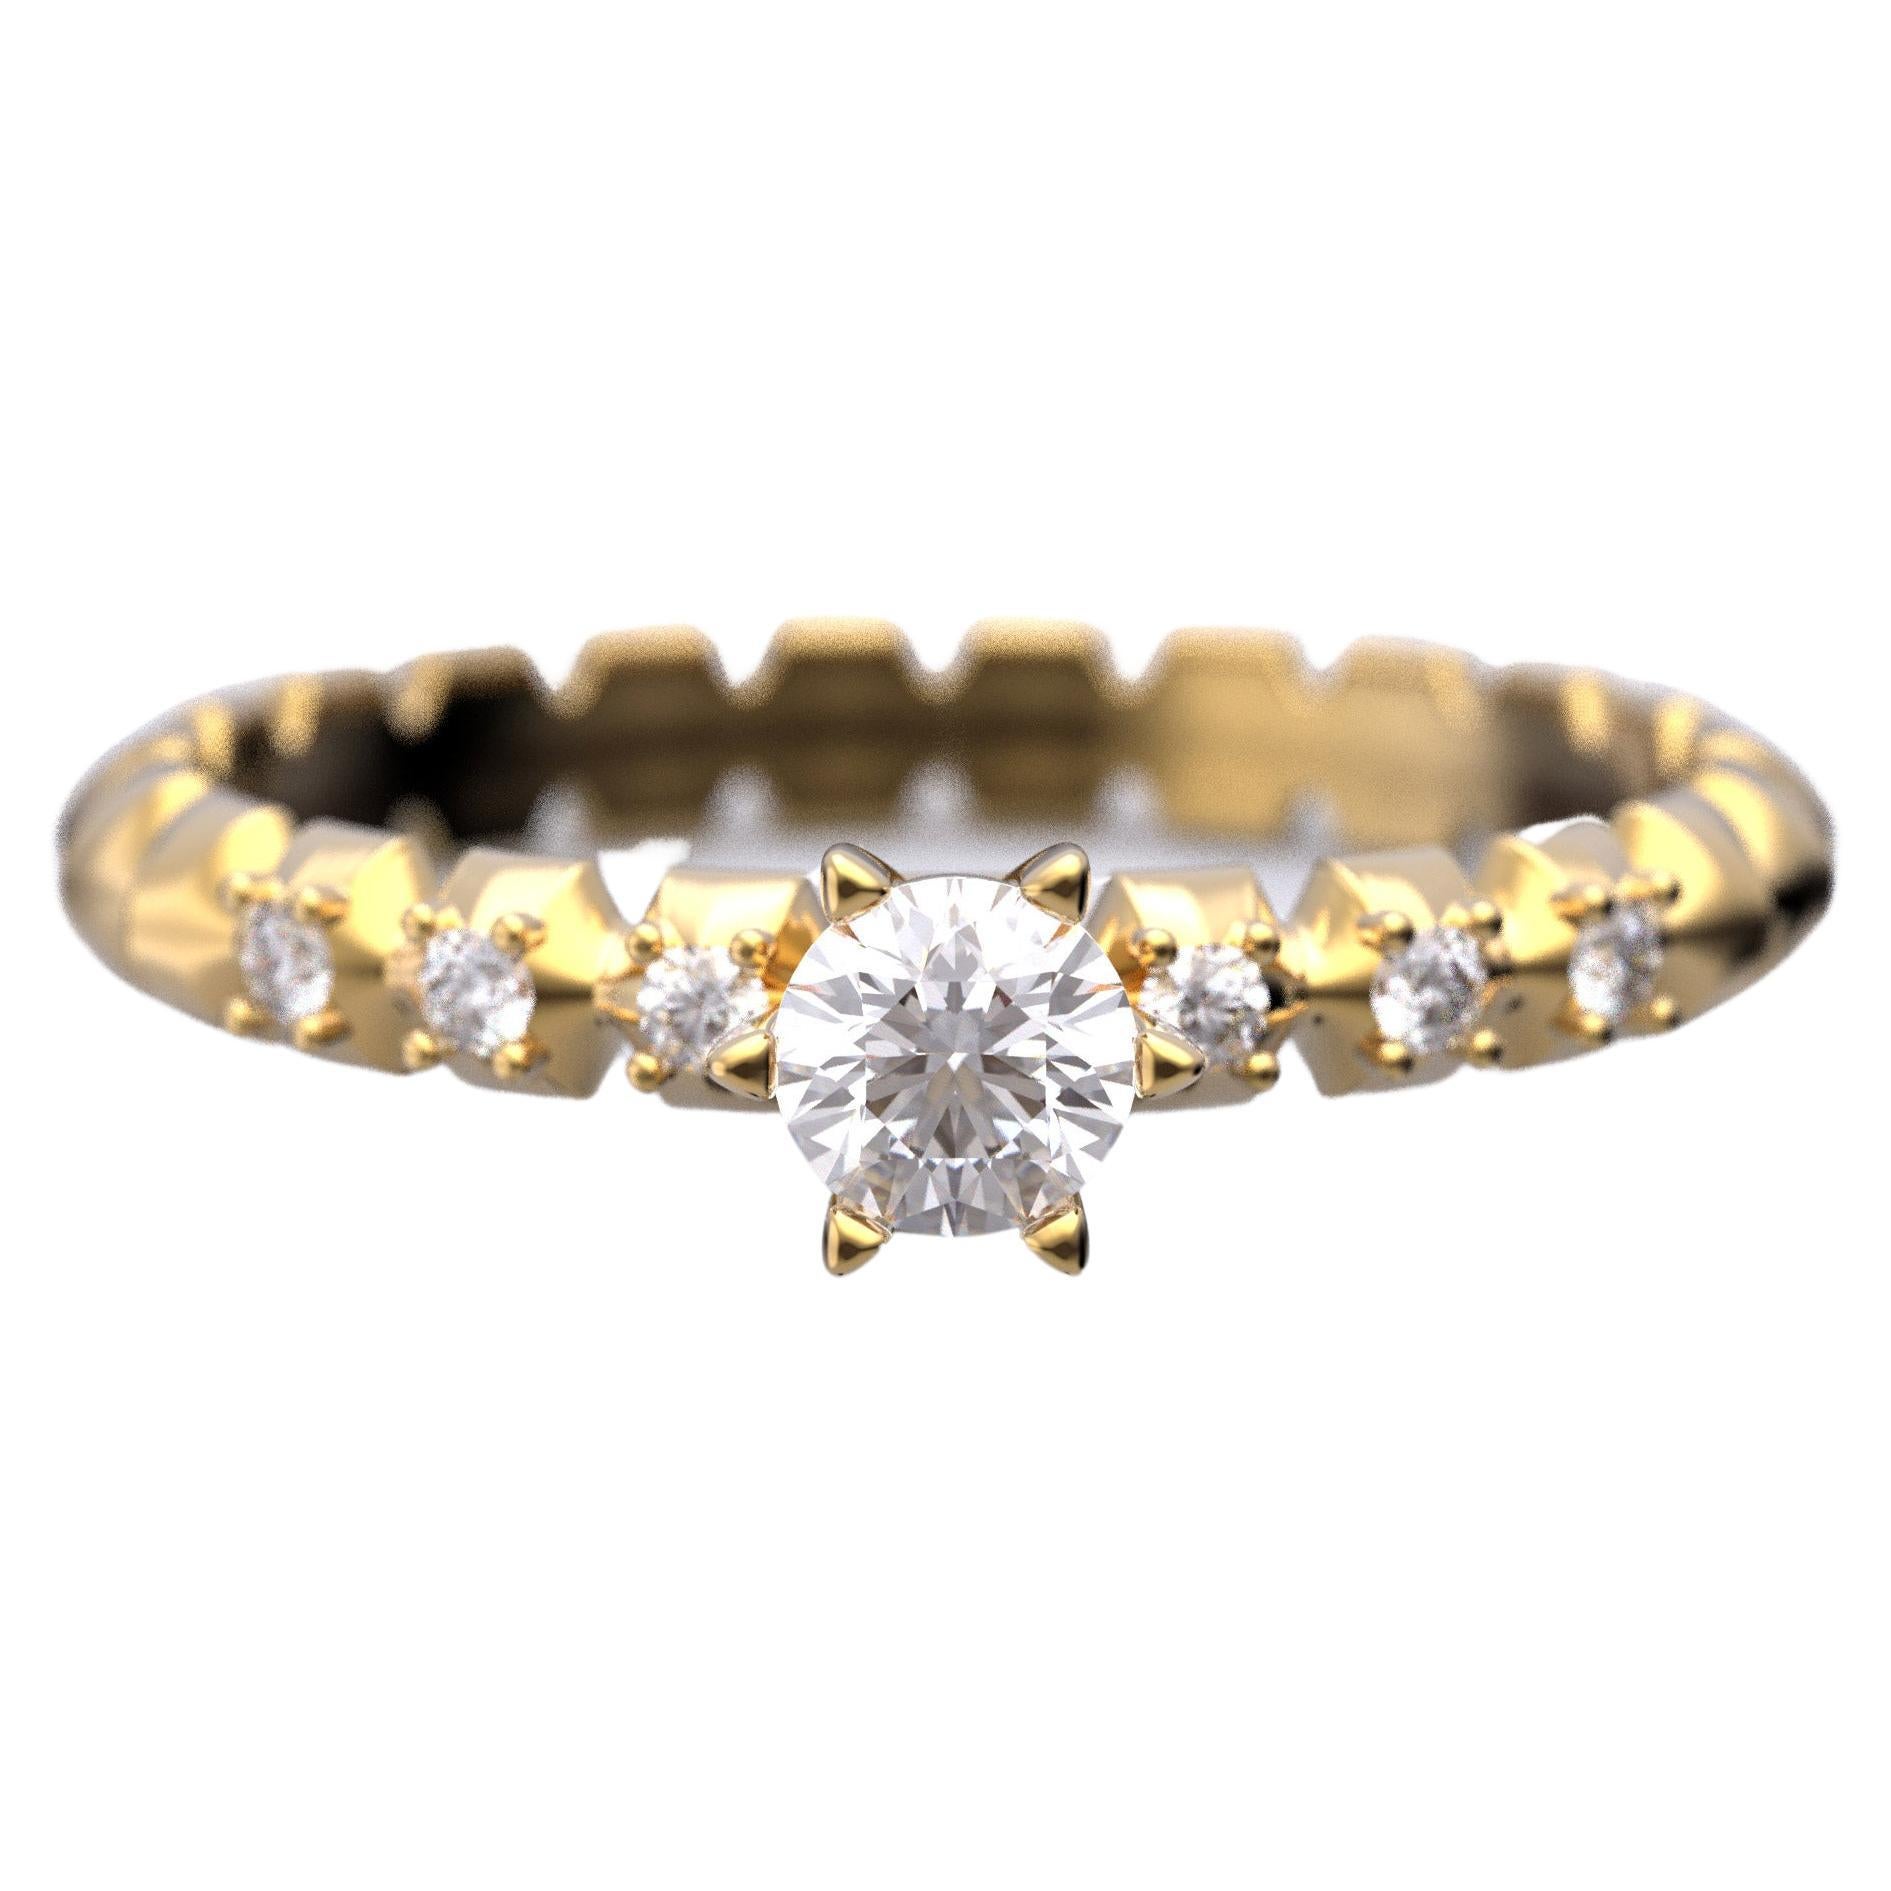 Italian-Made 0.32 Carat Diamond Engagement Ring in 14k Solid Gold